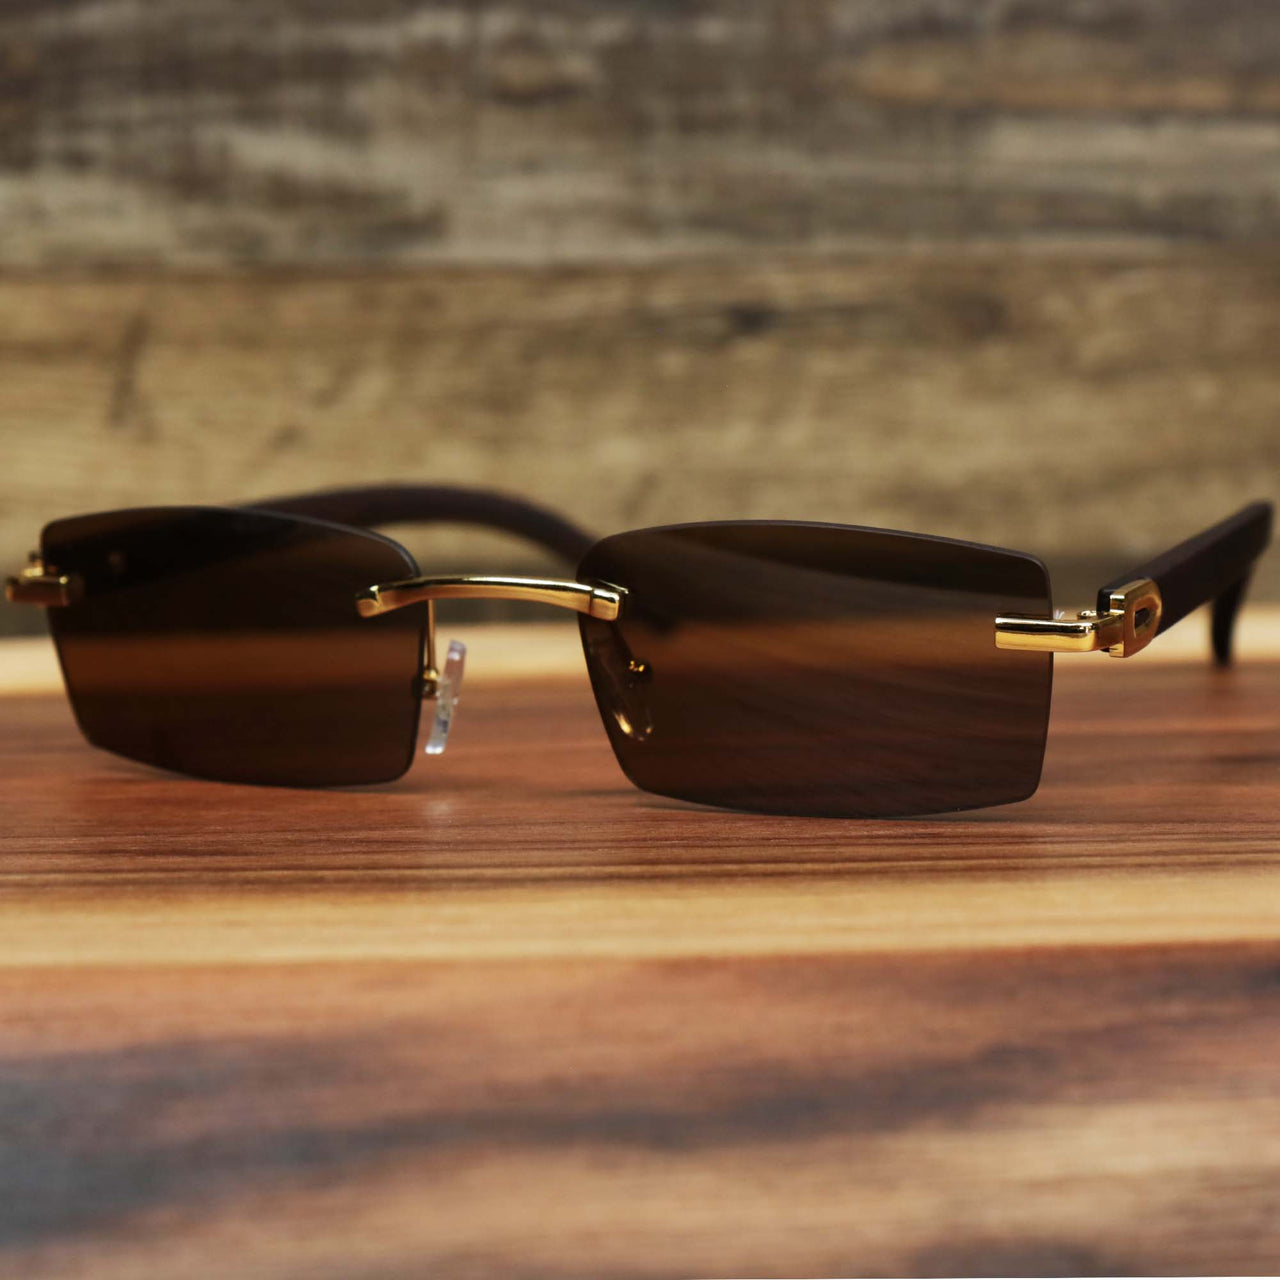 The Rectangle Wood and Metal Frame Brown Lens Sunglasses with Gold Frame